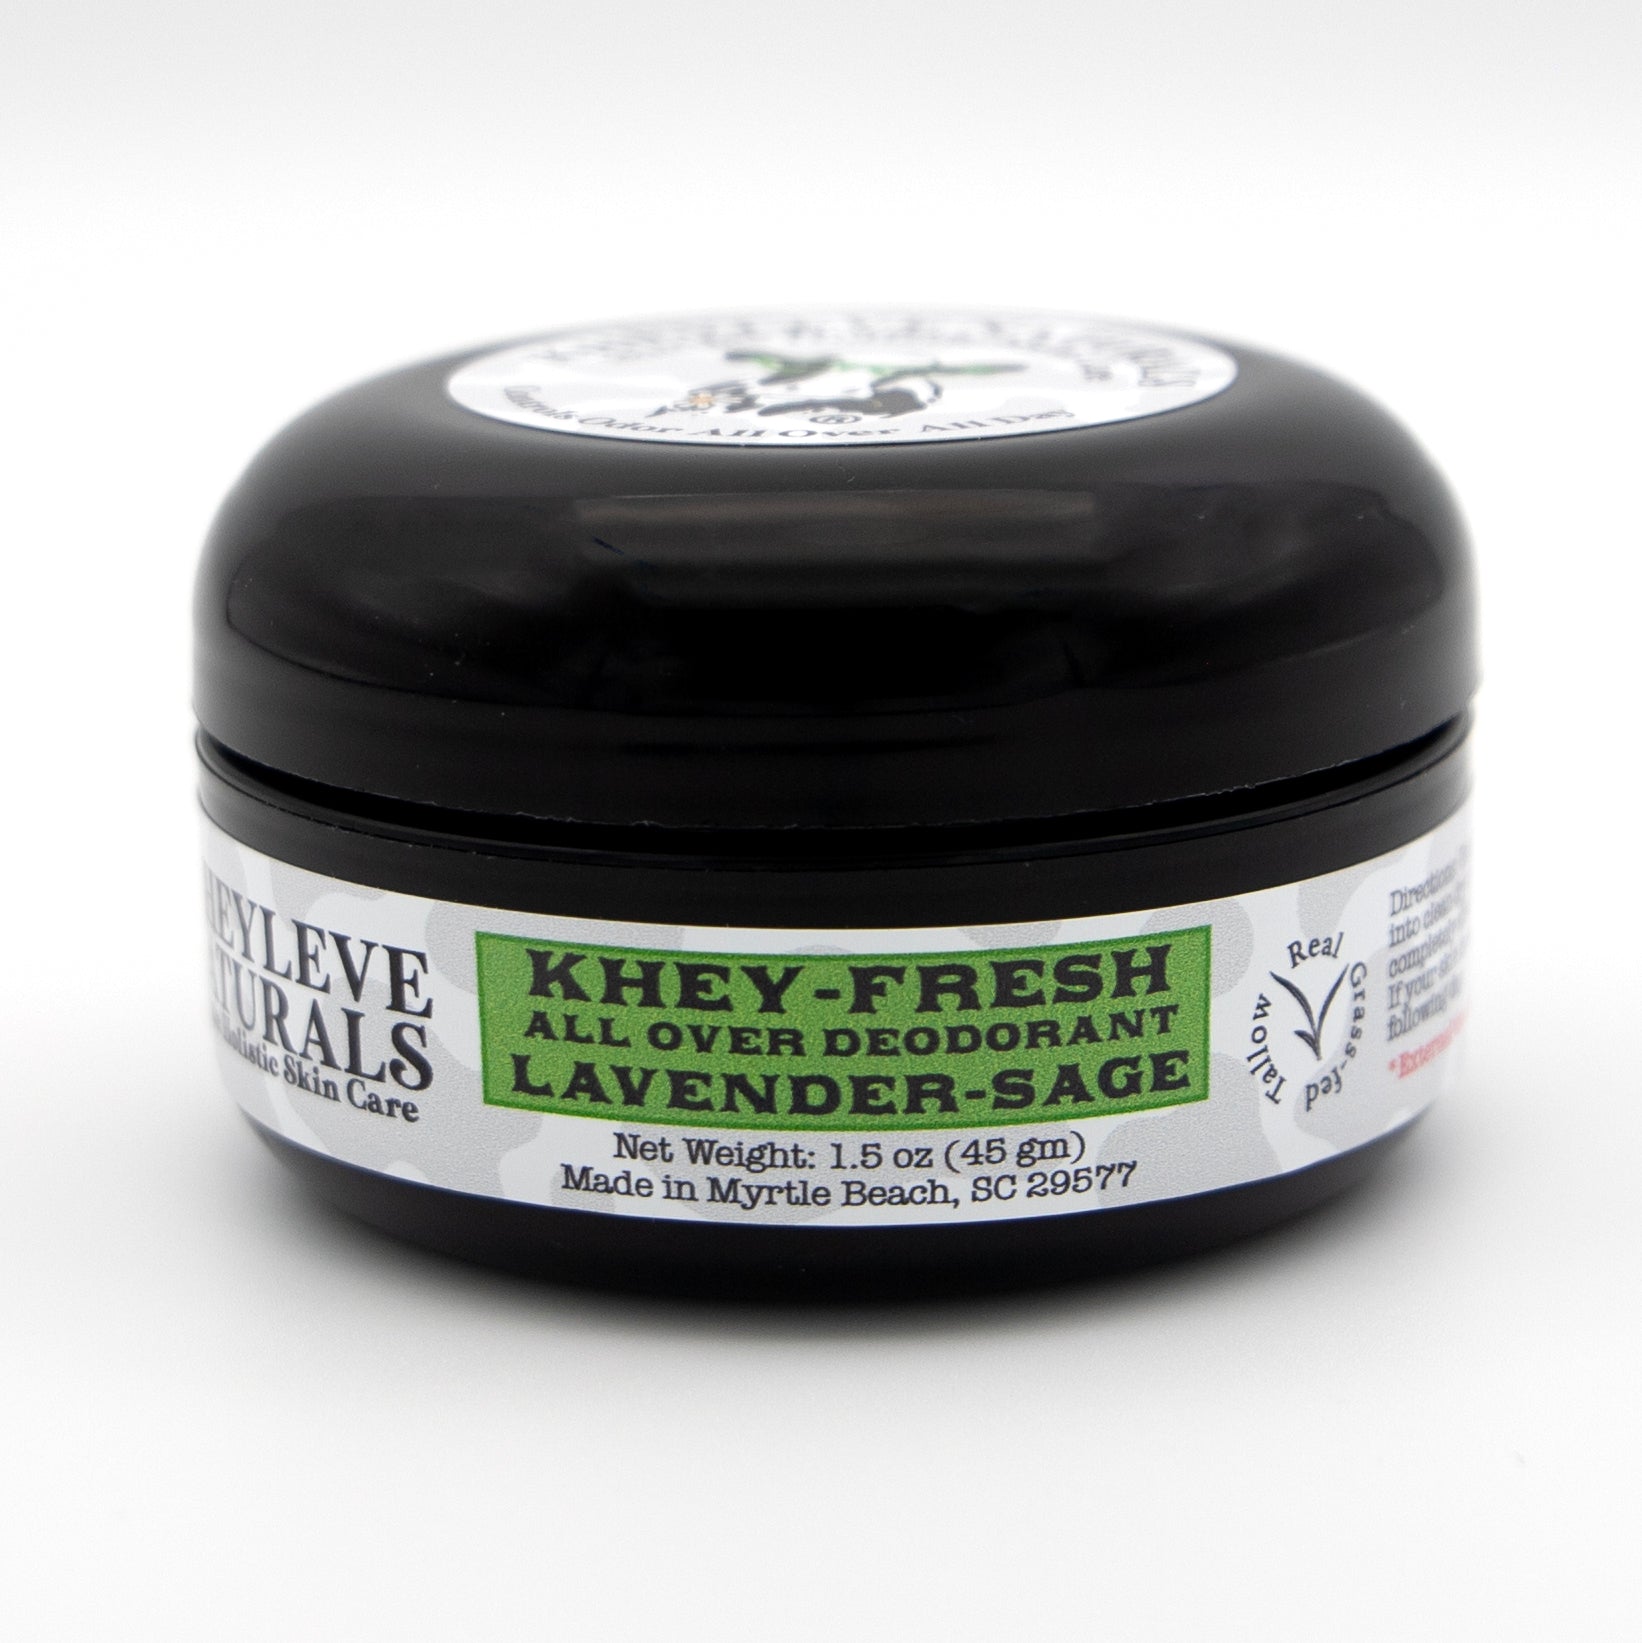 This natural deodorant is aluminum-free, paraben-free, phthalate-free, and baking soda free. Khey-Fresh is made from simple, clean ingredients that work.